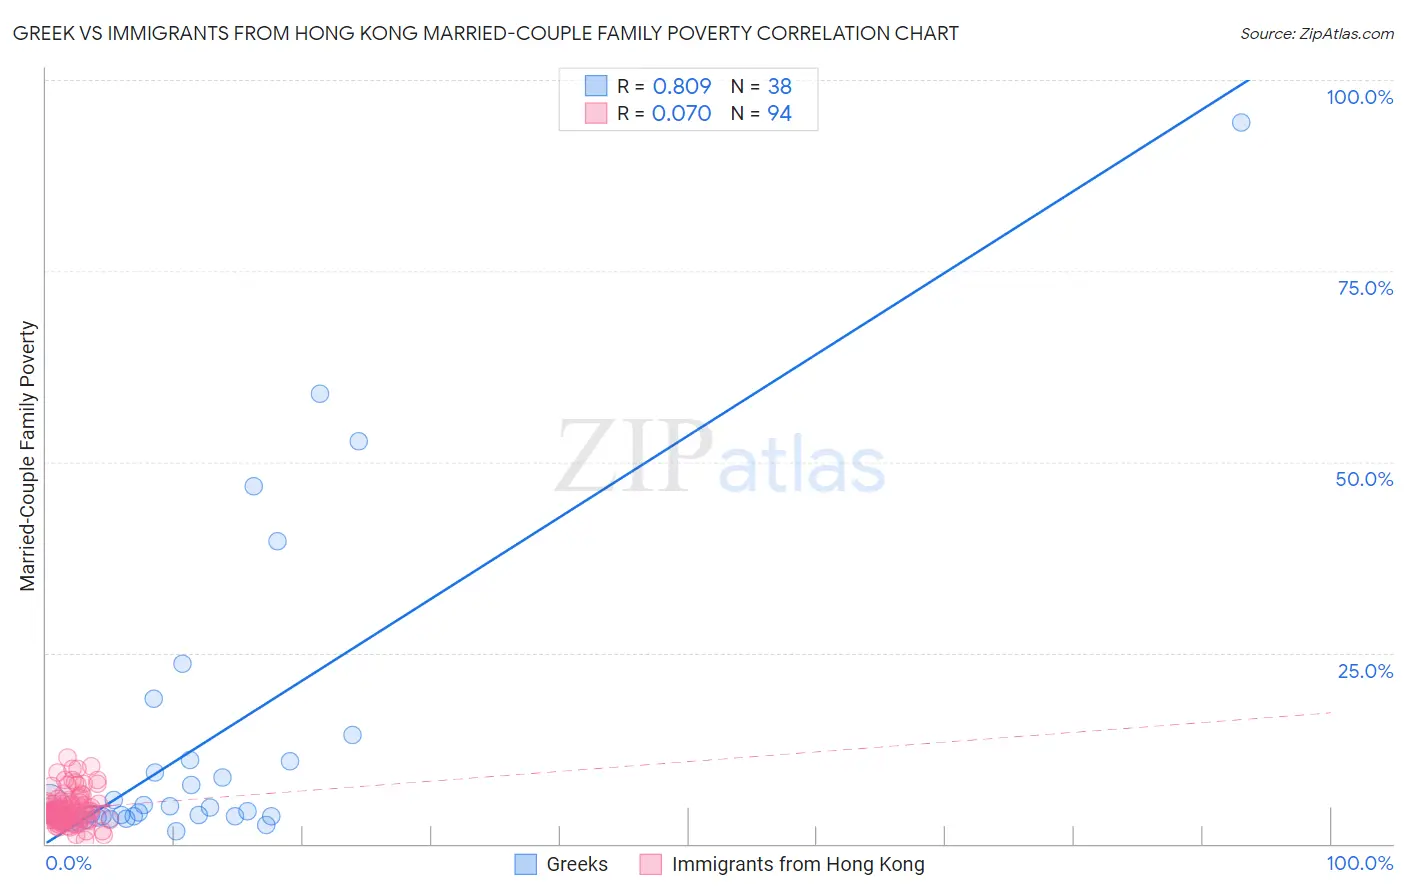 Greek vs Immigrants from Hong Kong Married-Couple Family Poverty